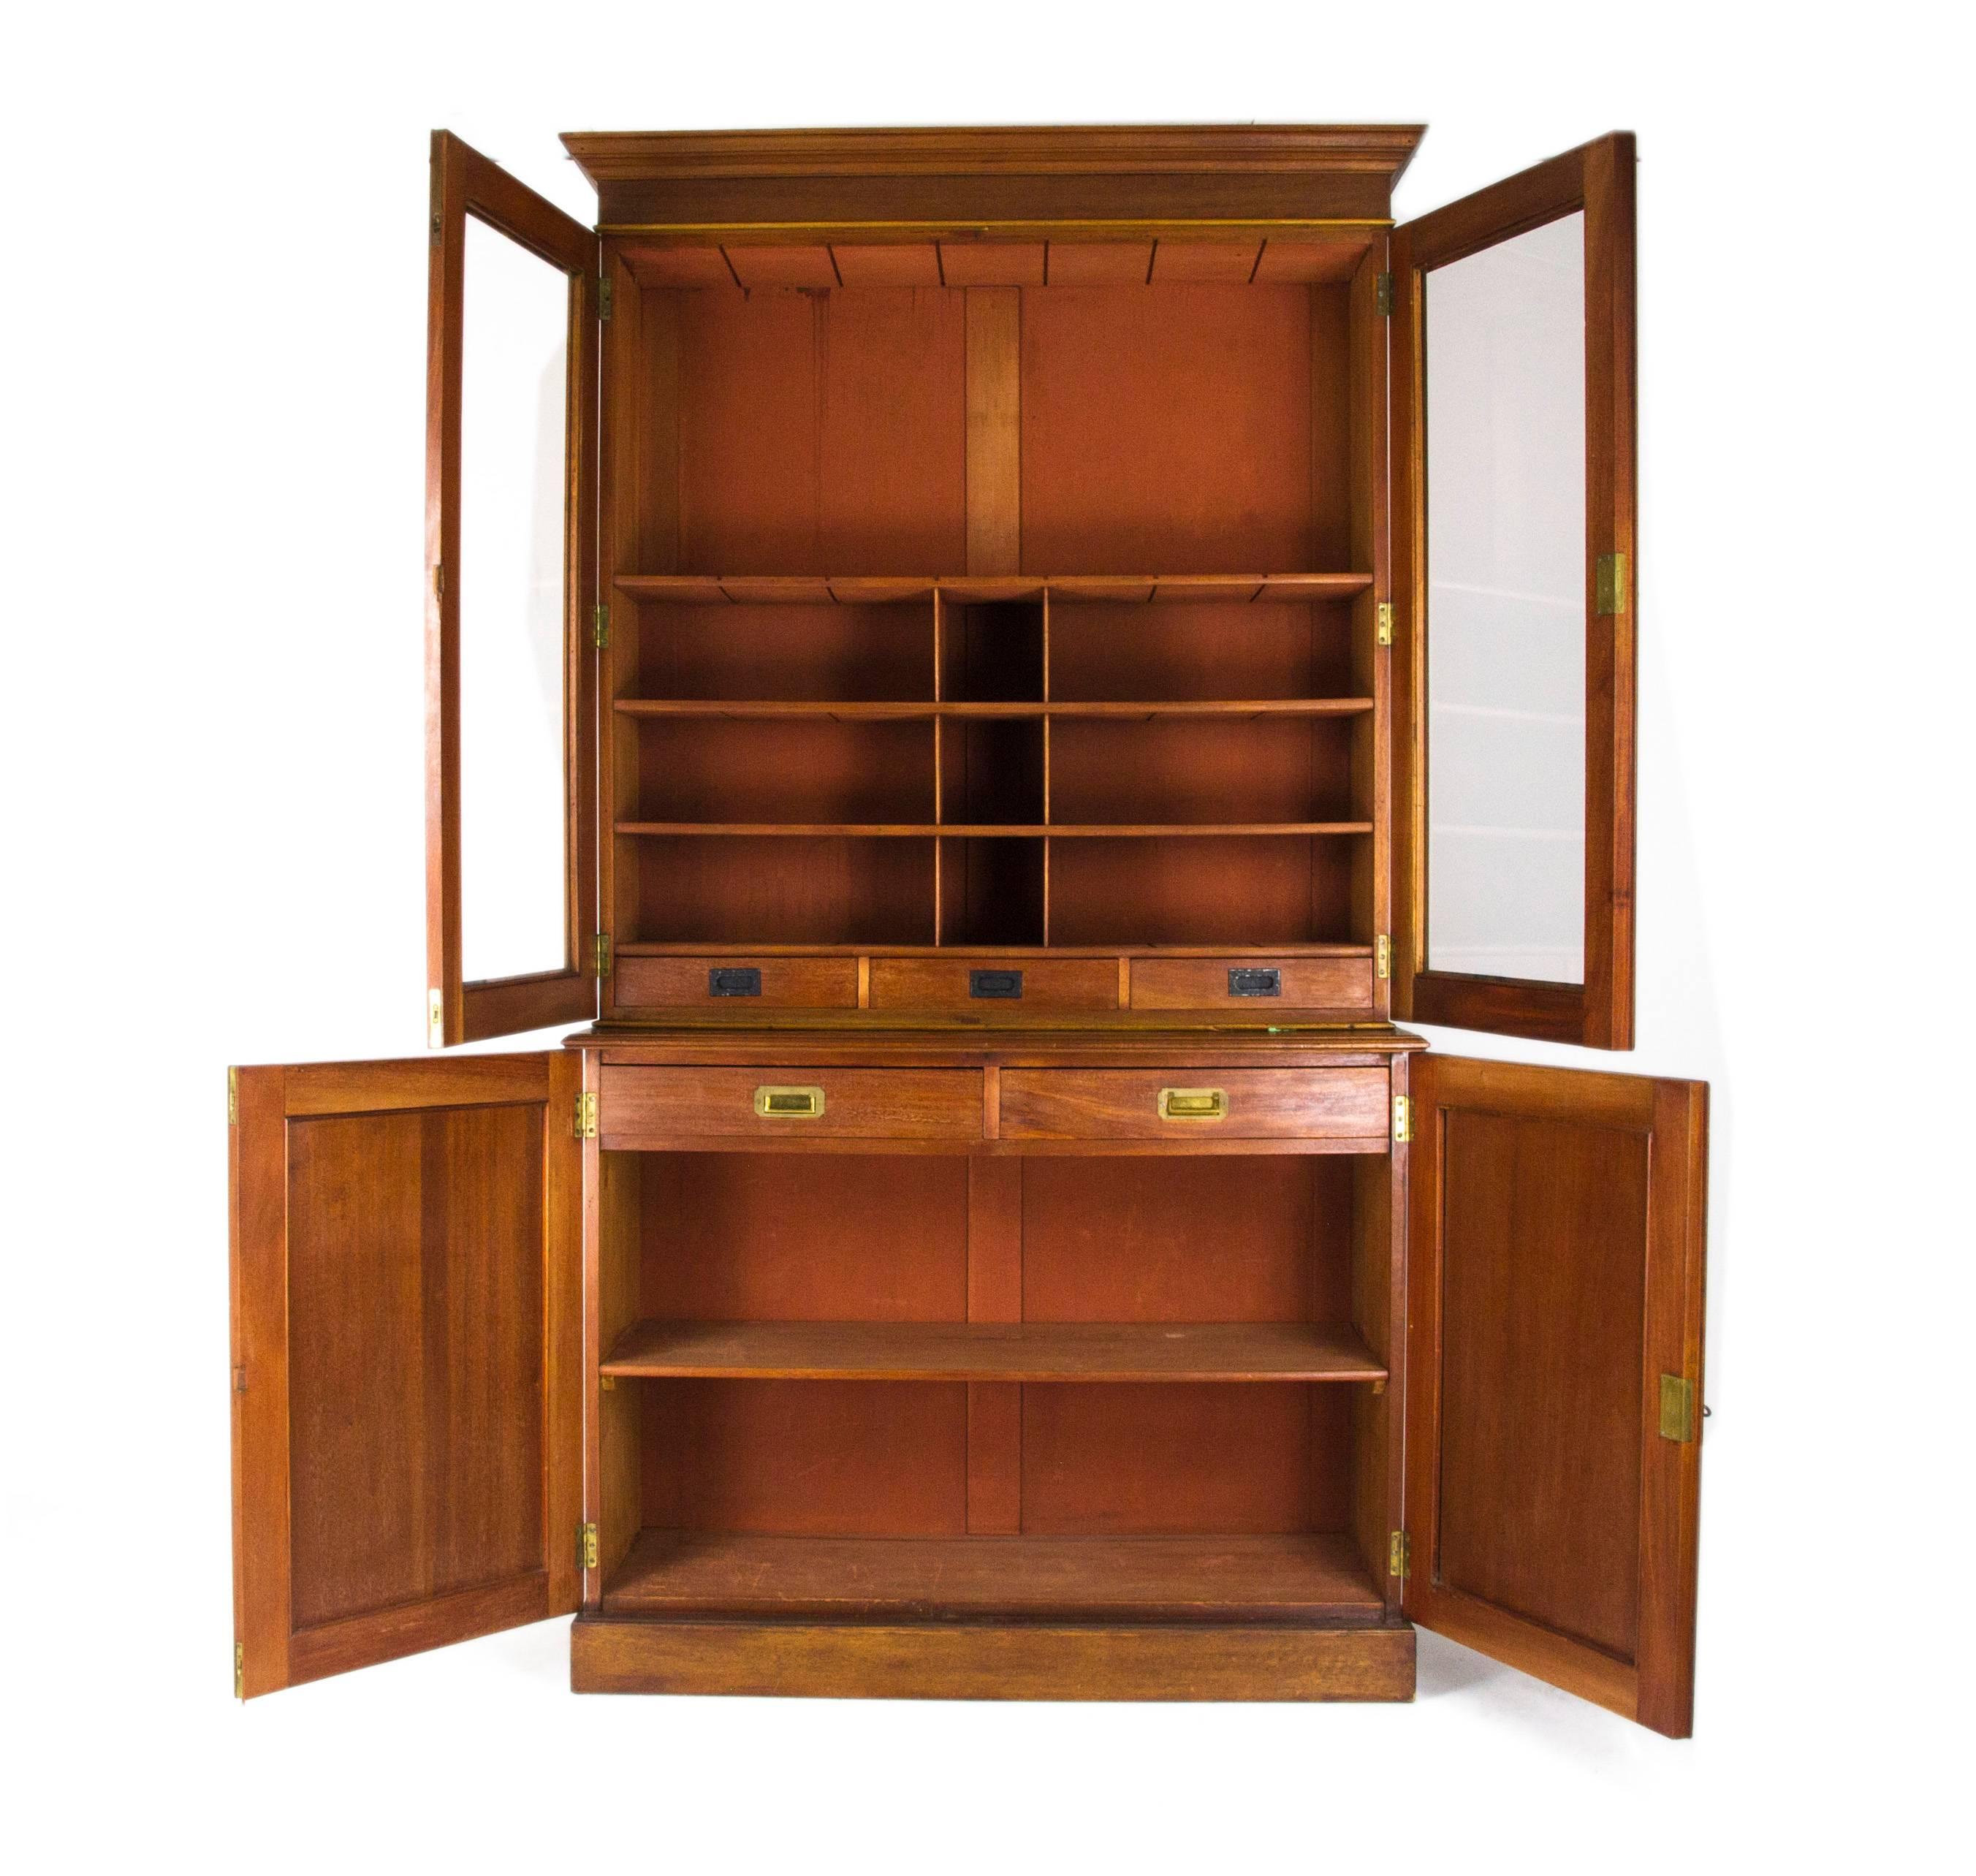 Scotland
1870
Solid Walnut construction
Original finish
Painted interior
Rectangular top
Flared cornice above
Two glass doors below
Three fixed shelves interior
Two doors below with two fitted dovetailed drawers one fixed shelf
Separates into two